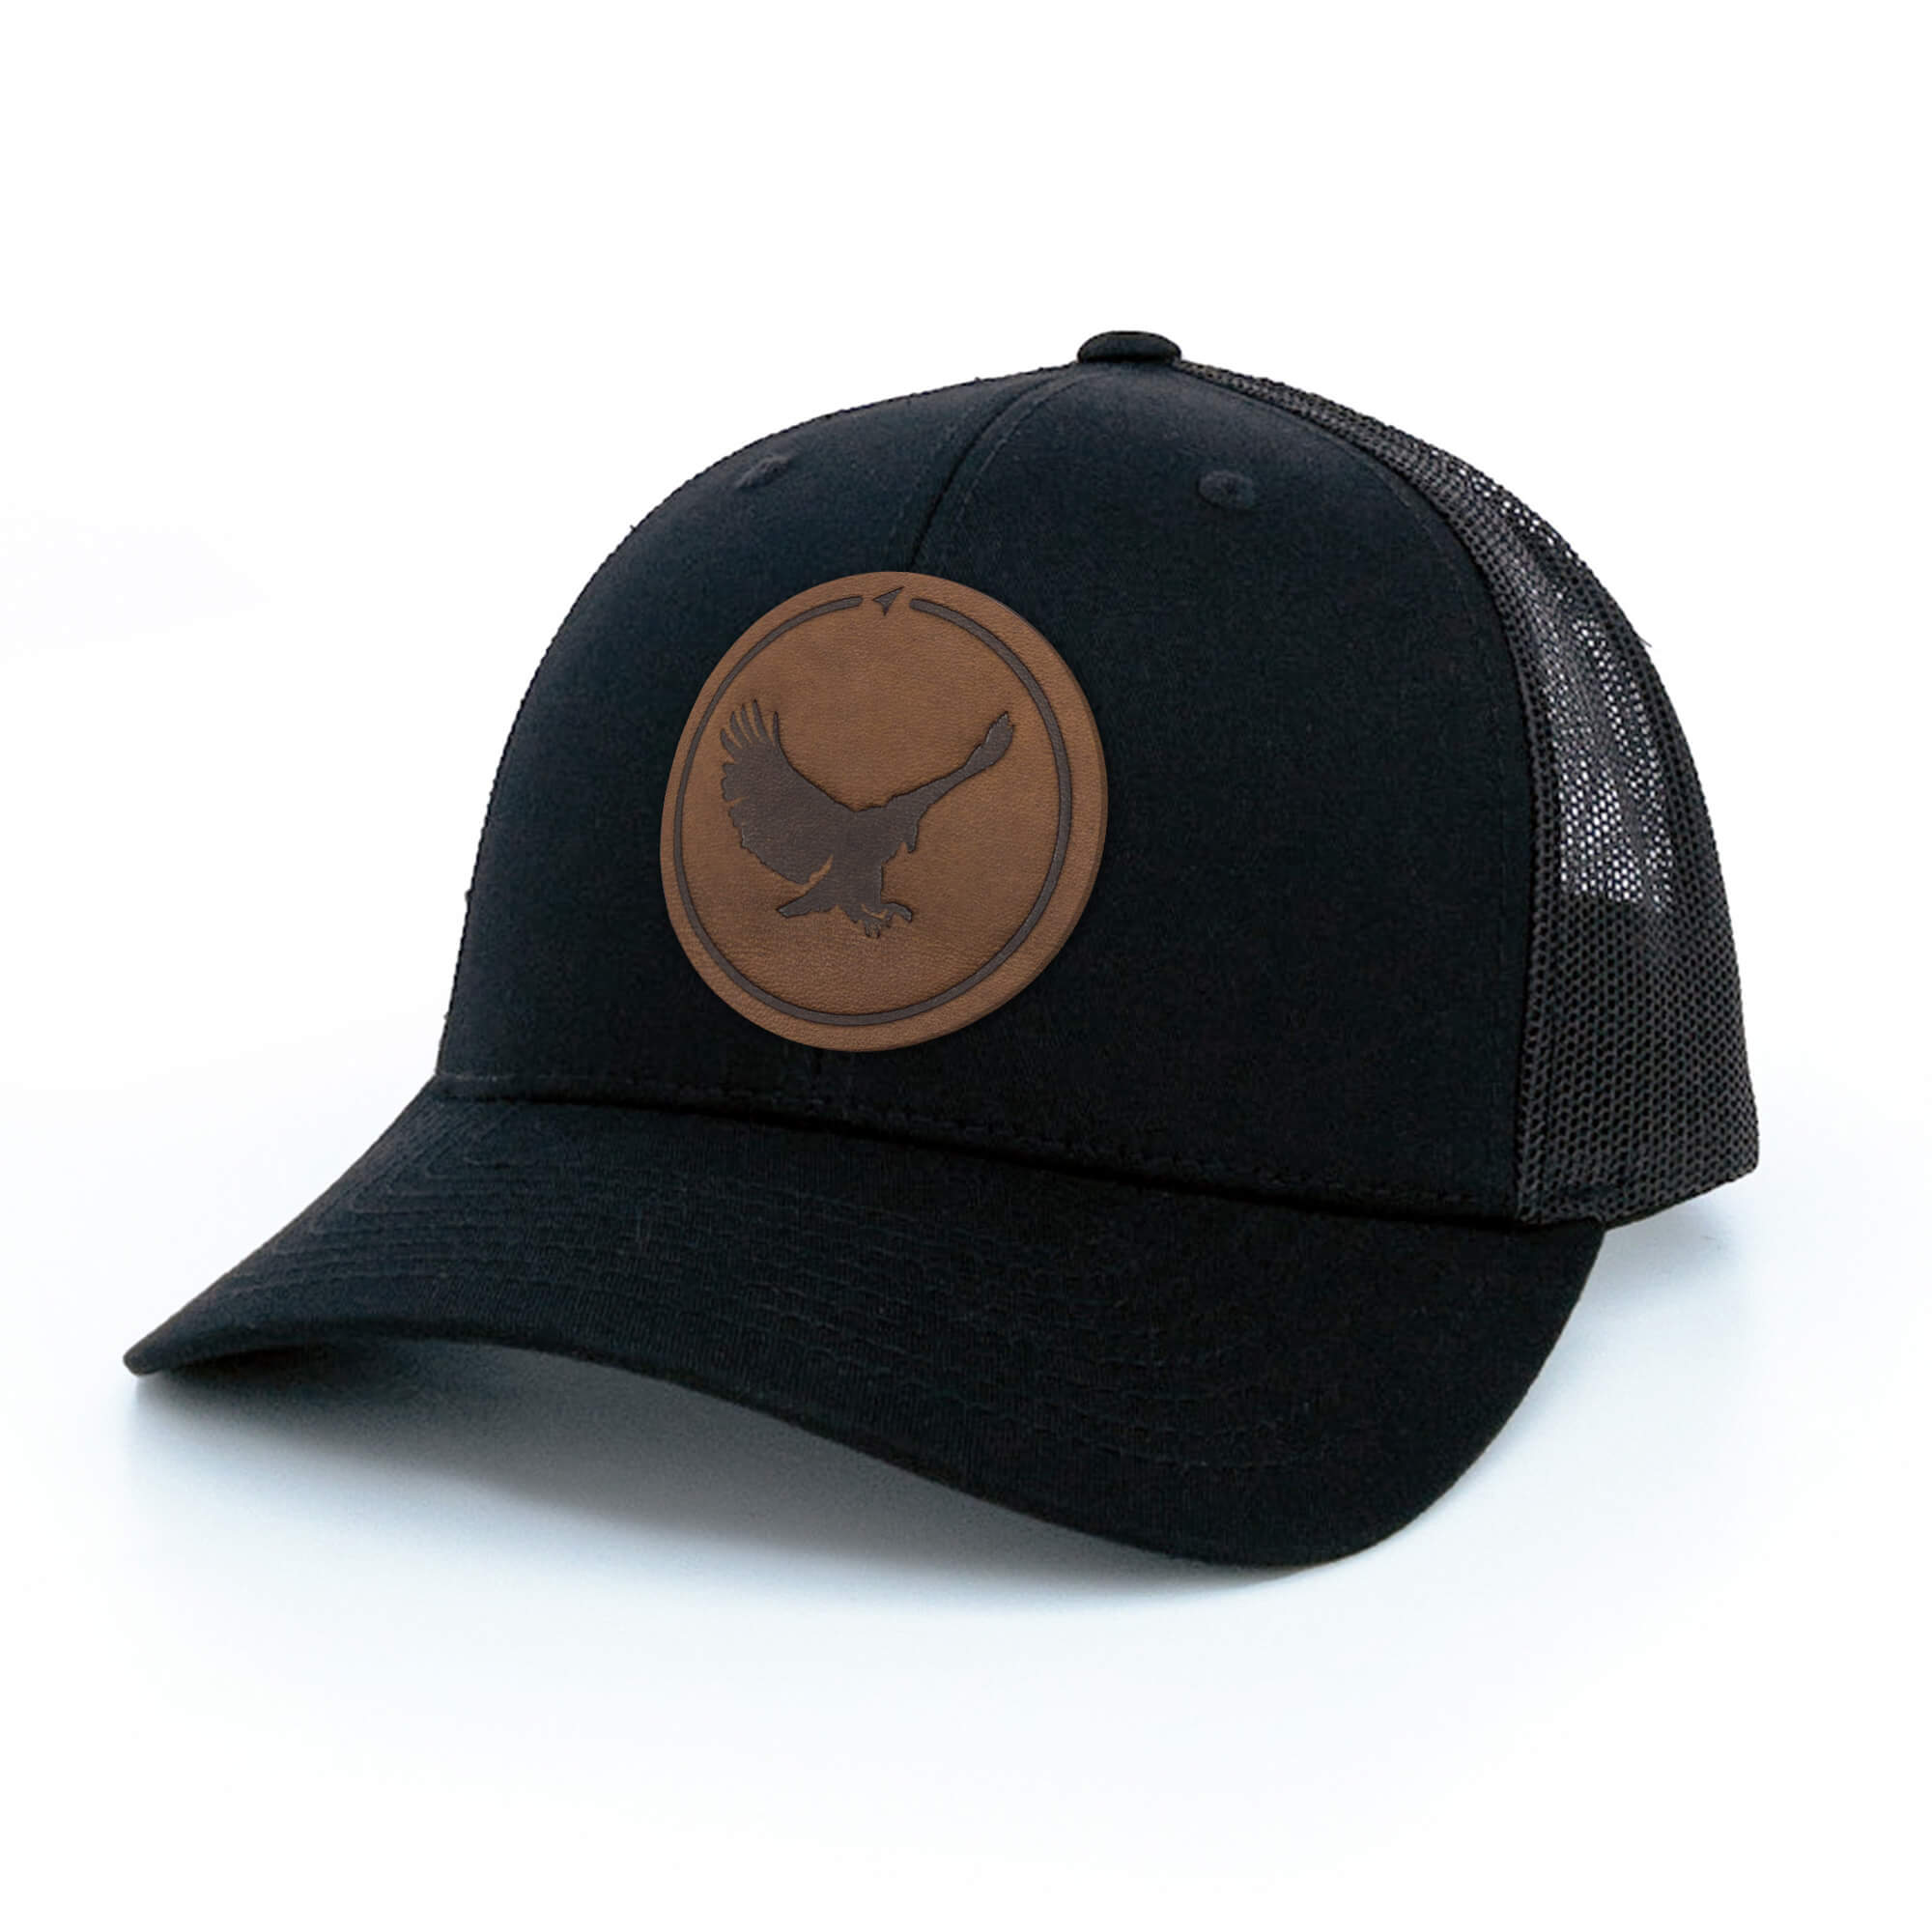 Black trucker hat with full-grain leather patch of an Eagle | BLACK-004-004, CHARC-004-004, NAVY-004-004, HGREY-004-004, MOSS-004-004, BROWN-004-004